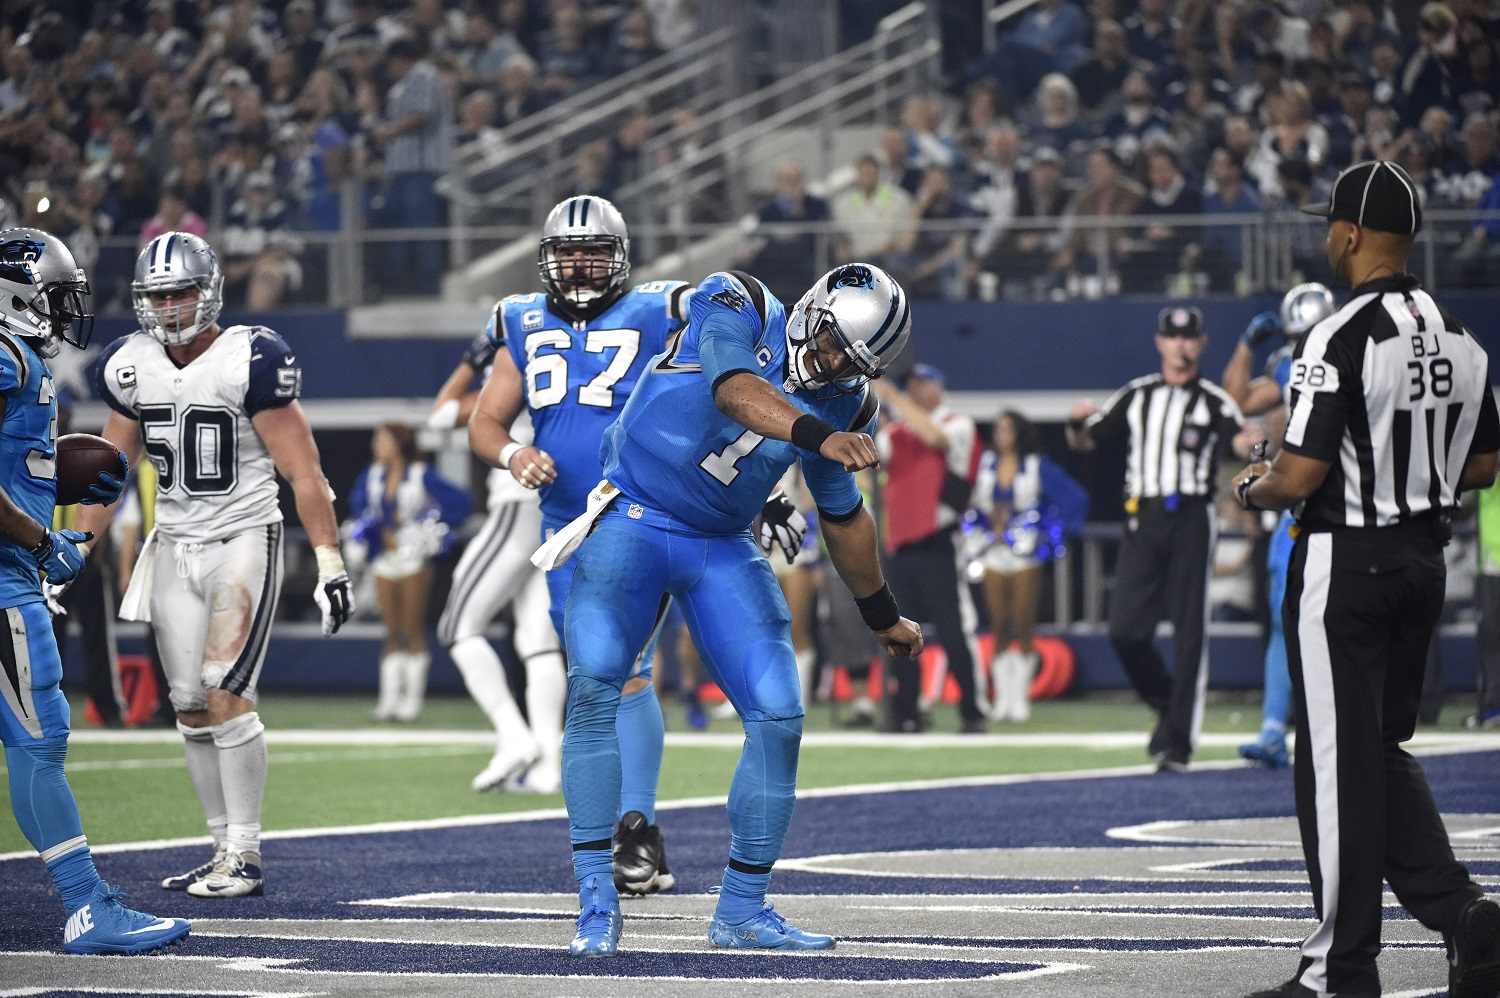 Carolina Panthers quarterback Cam Newton (1) dances in the end zone after rushing for a touchdown against the Dallas Cowboys during an NFL football game, Thursday, Nov. 26, 2015, in Arlington, Texas. (AP Photo/Michael Ainsworth)